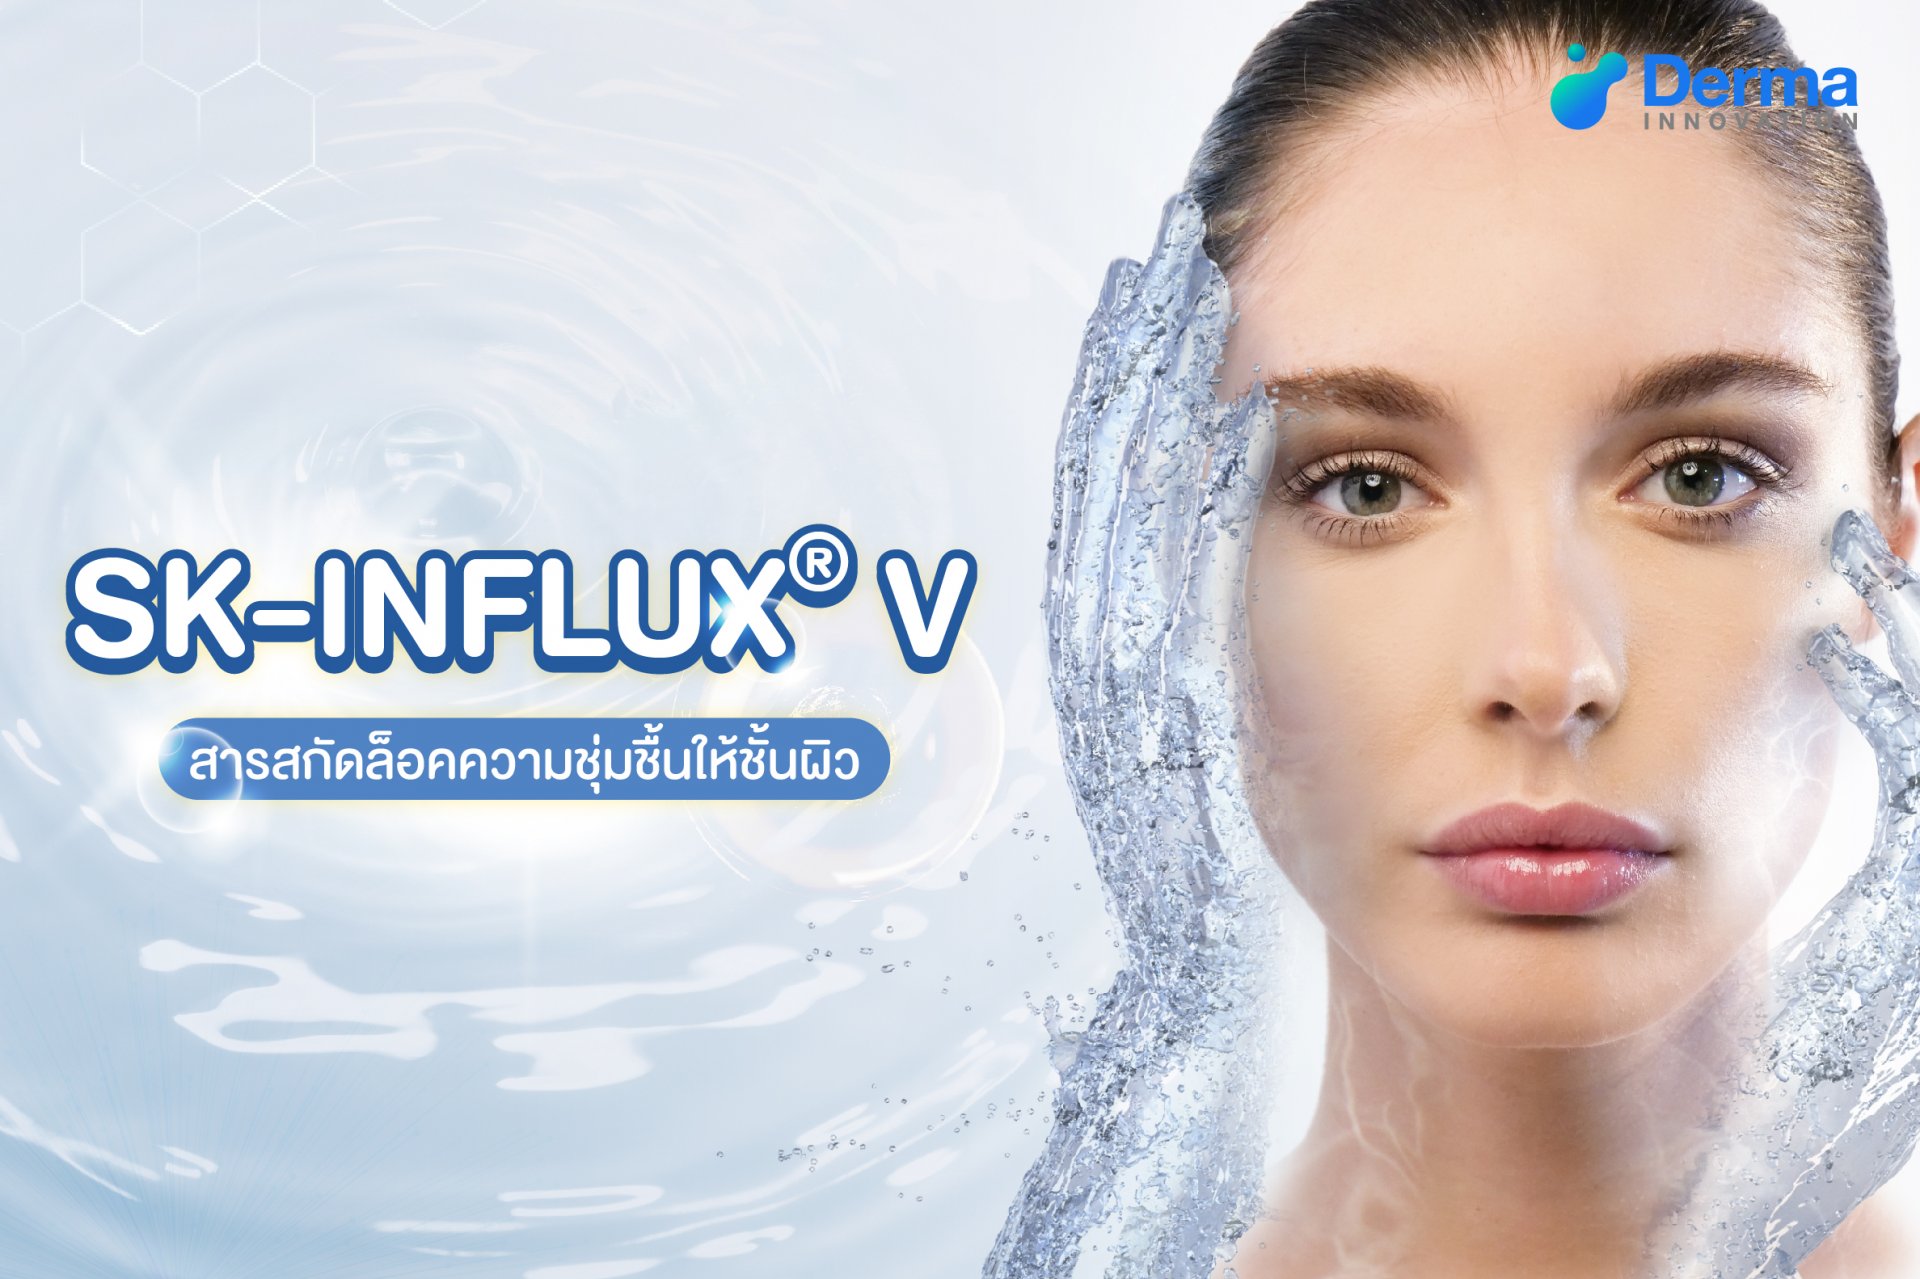 SK-INFLUX®V moisture-locking on the skin layers